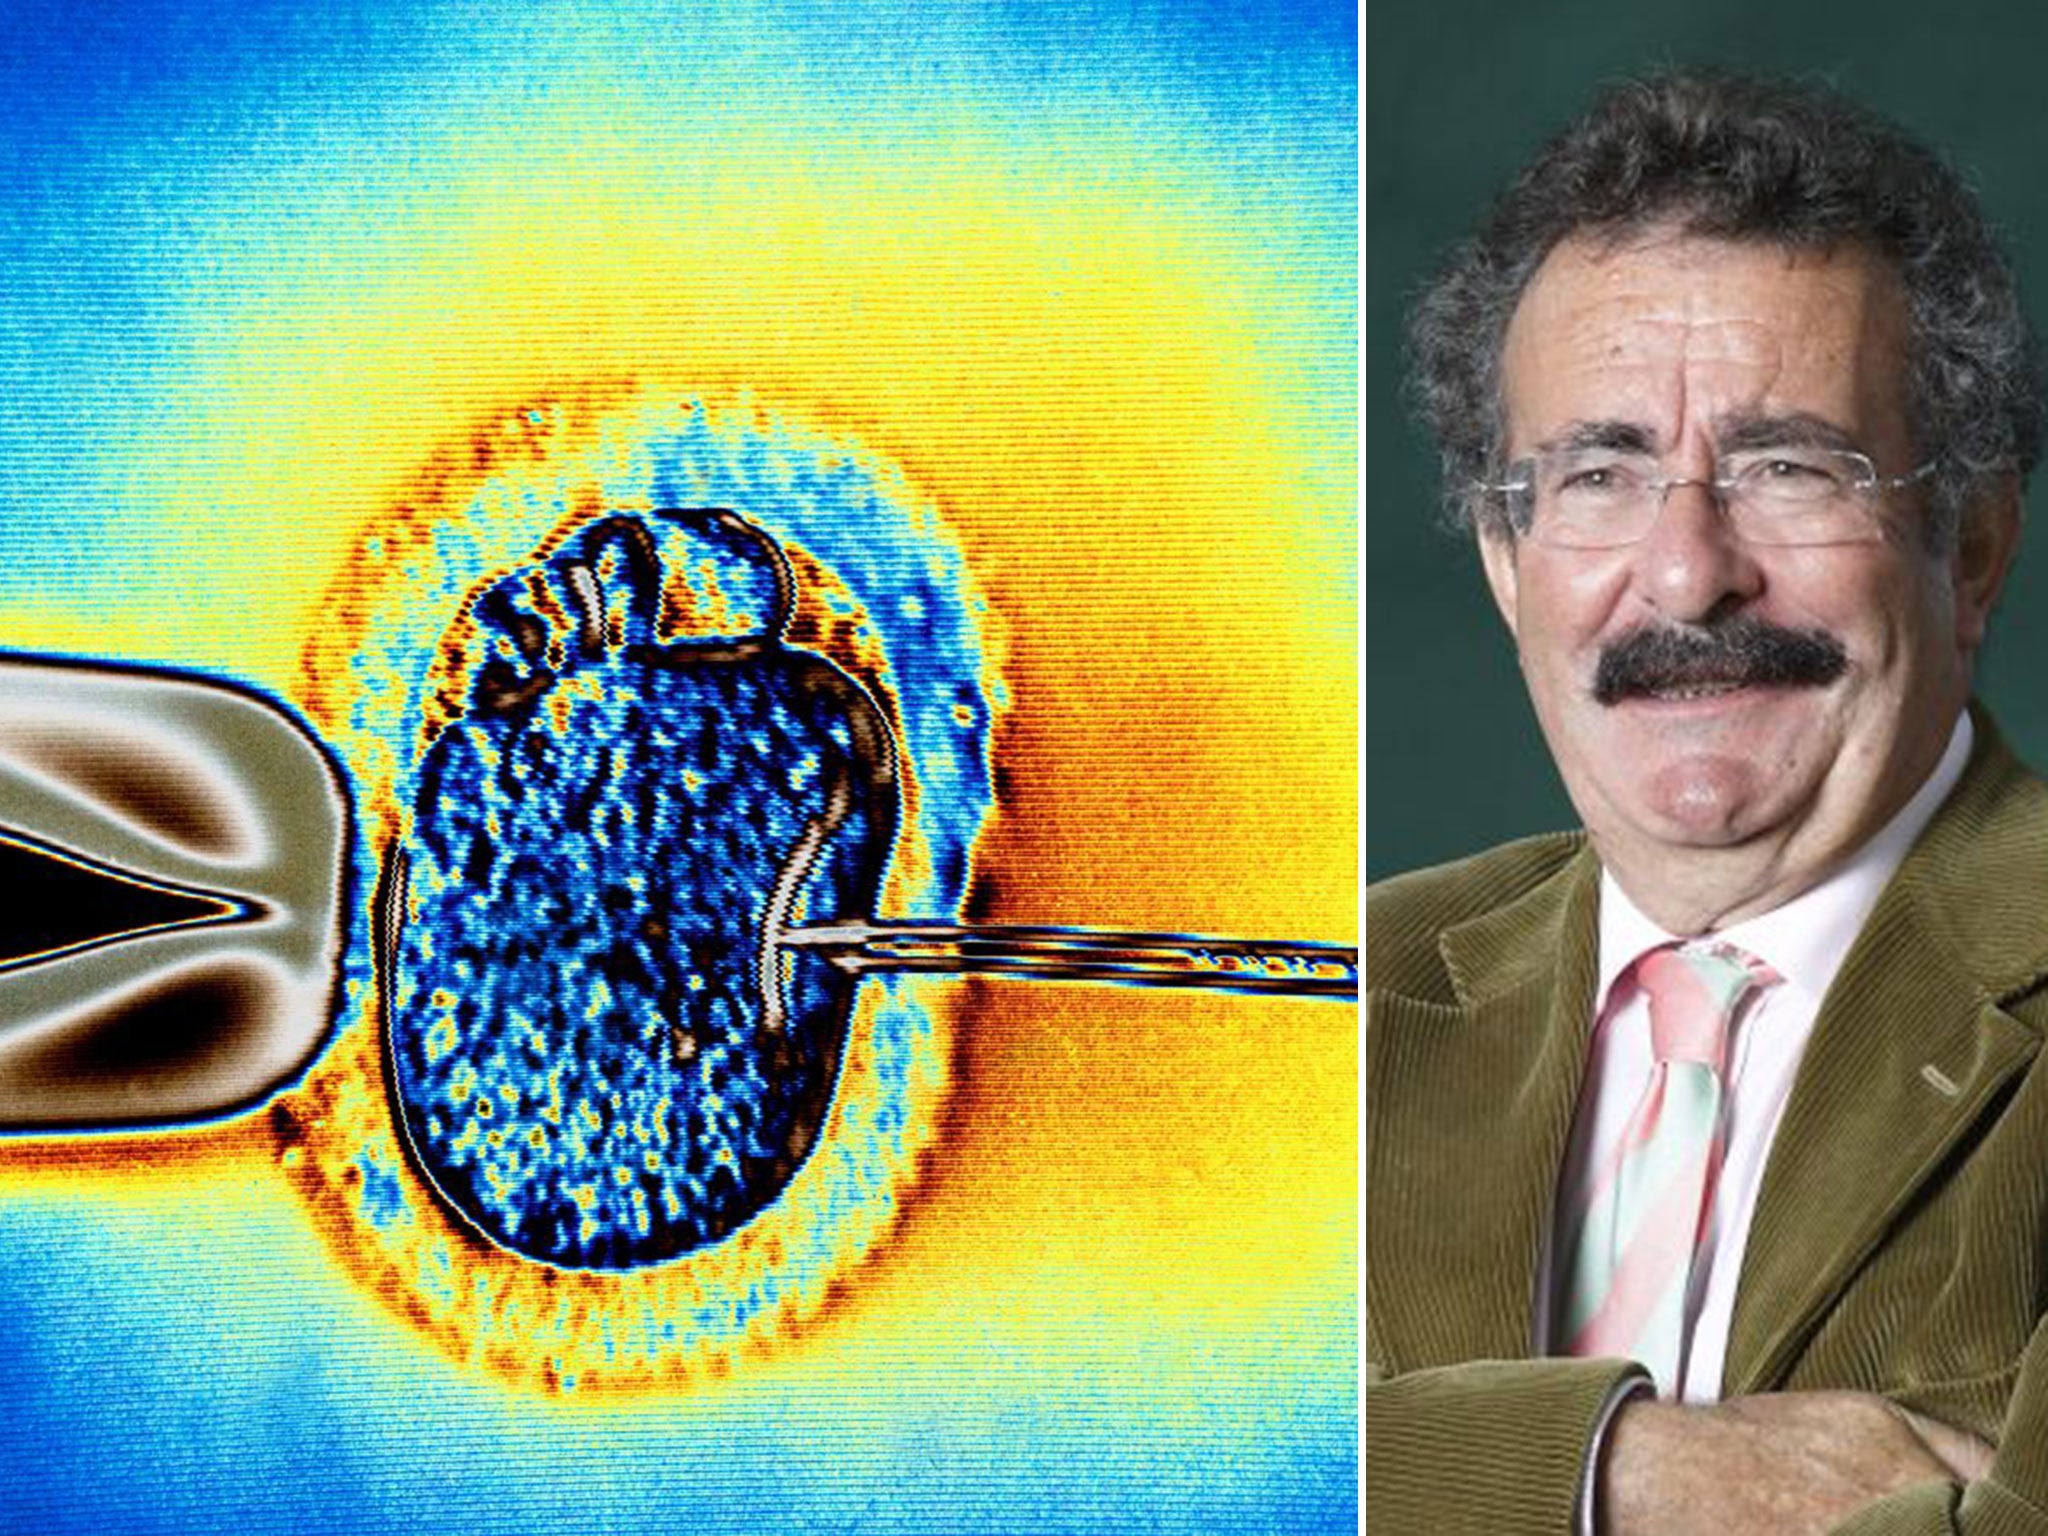 Lord Winston claims private clinics are selling ineffective IVF treatment to desperate patients